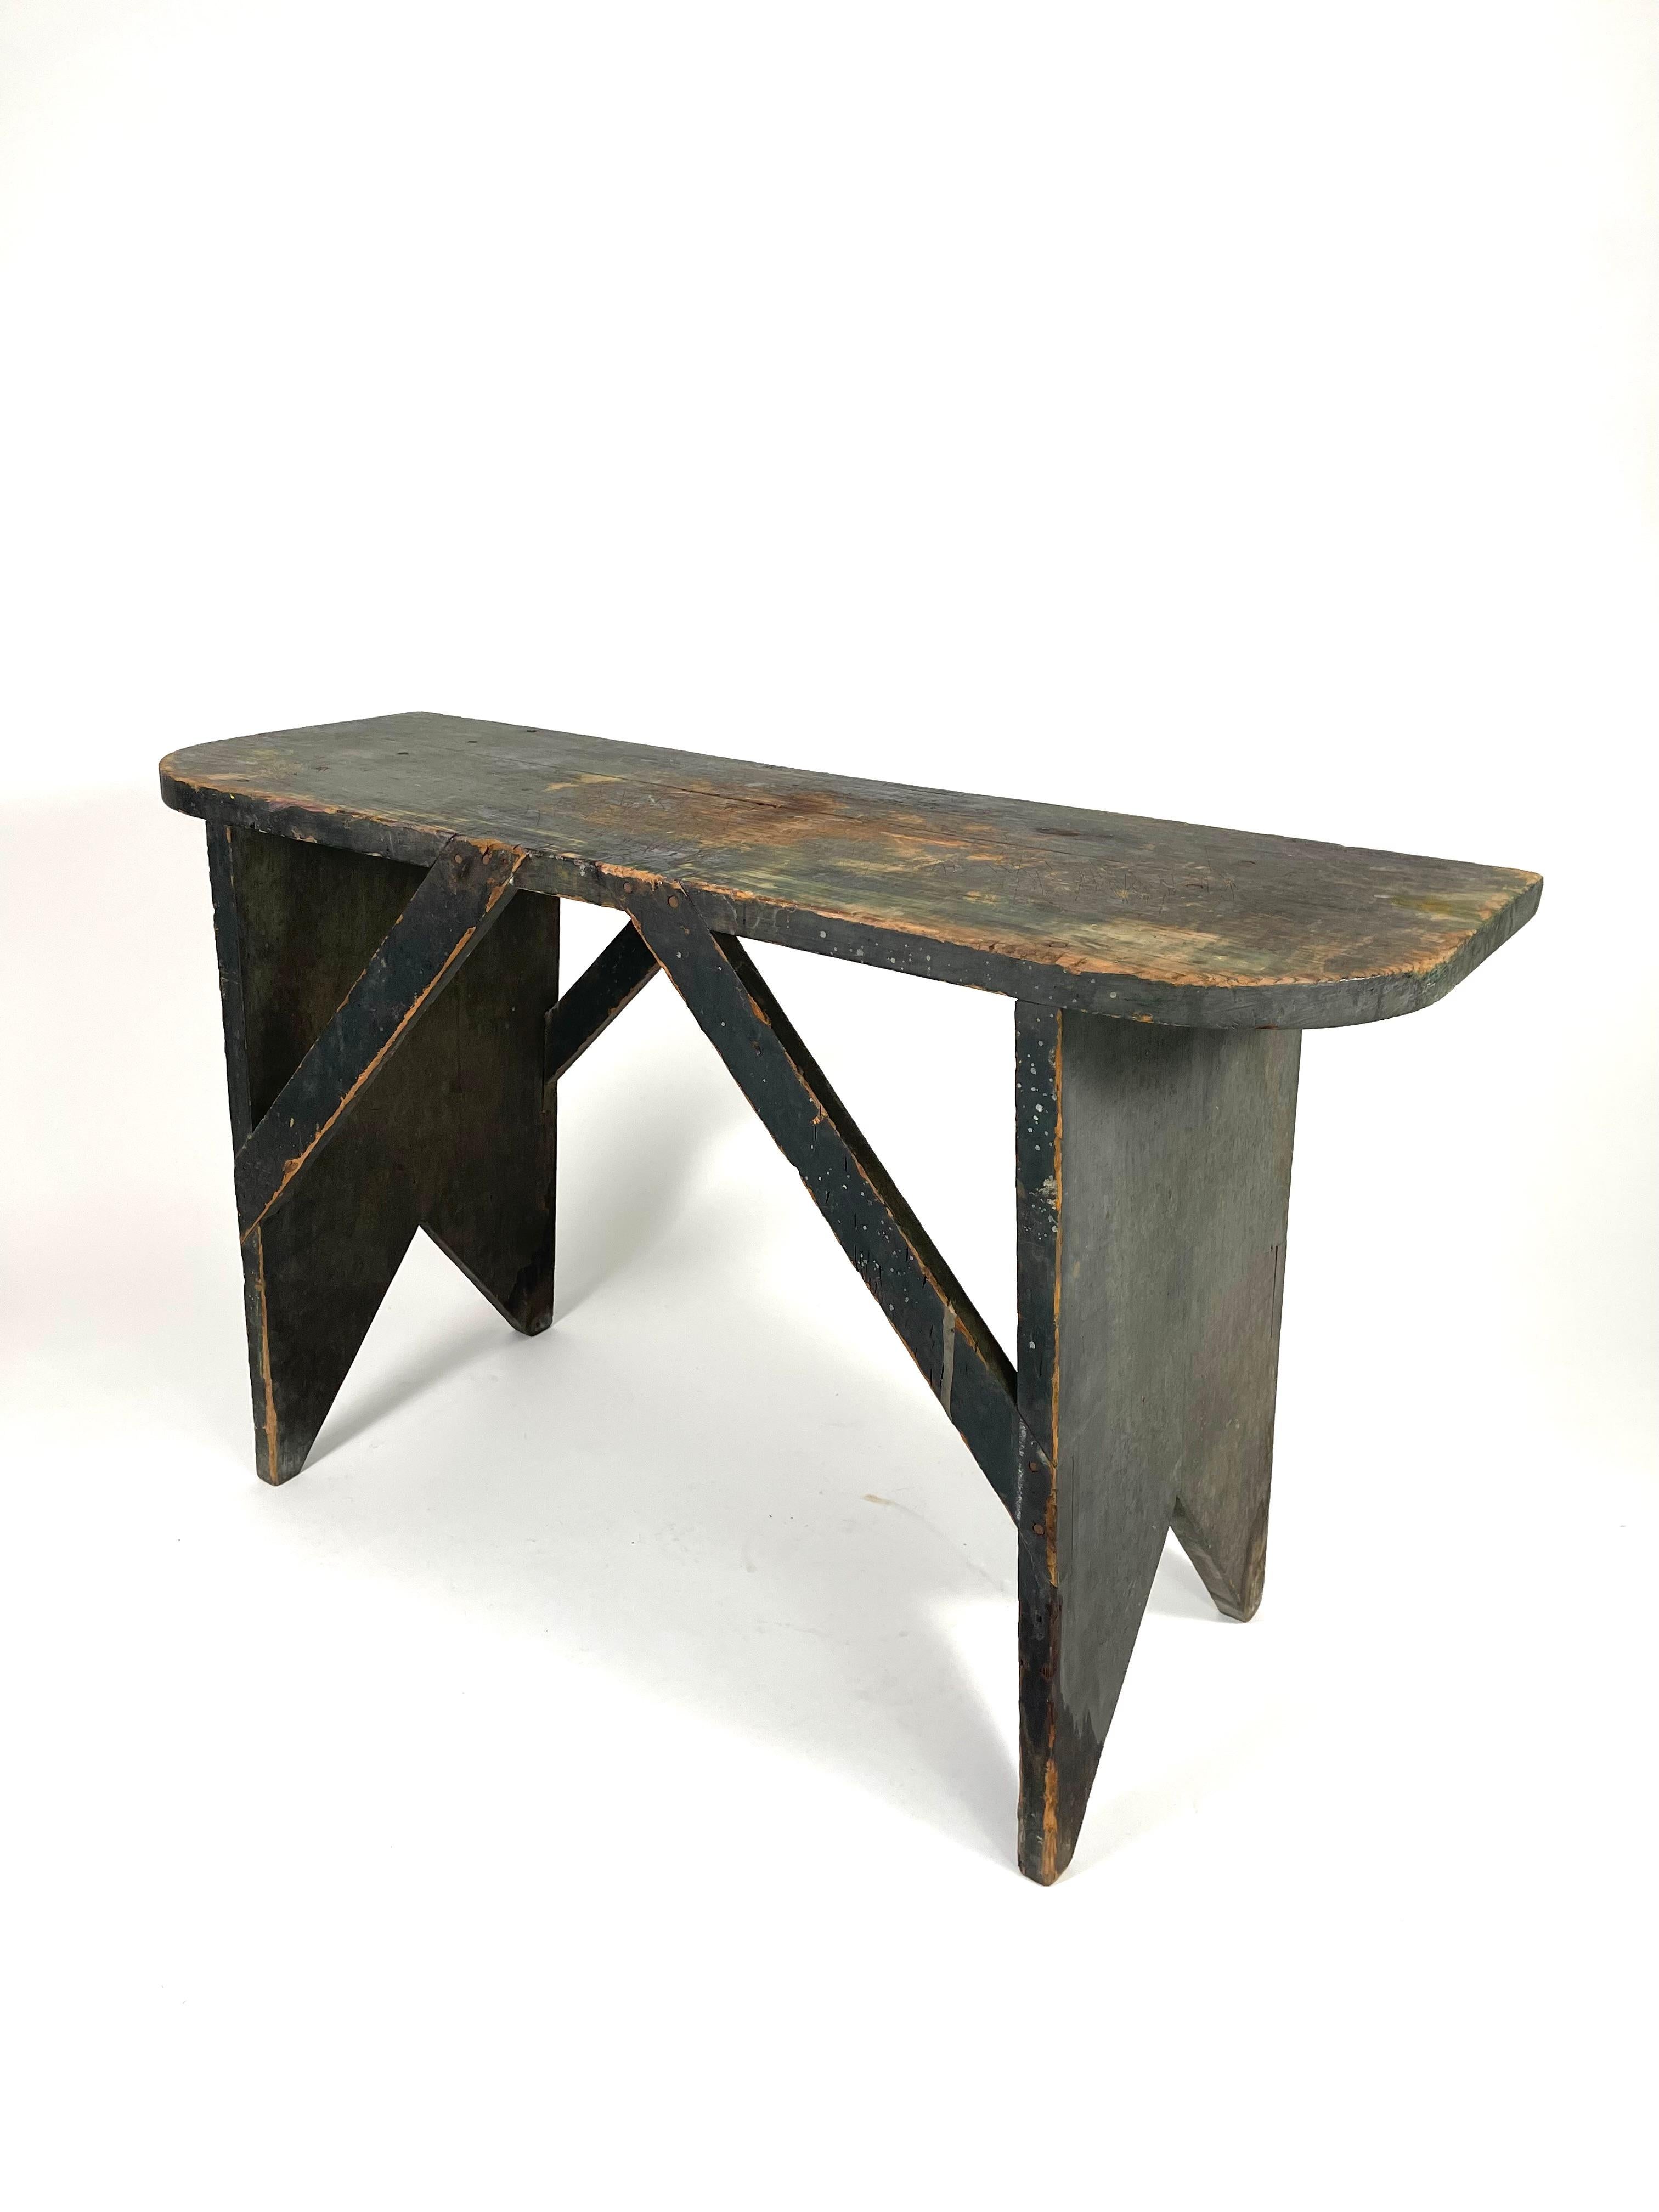 19th Century Bucket Bench or Table in Old Green Paint 4